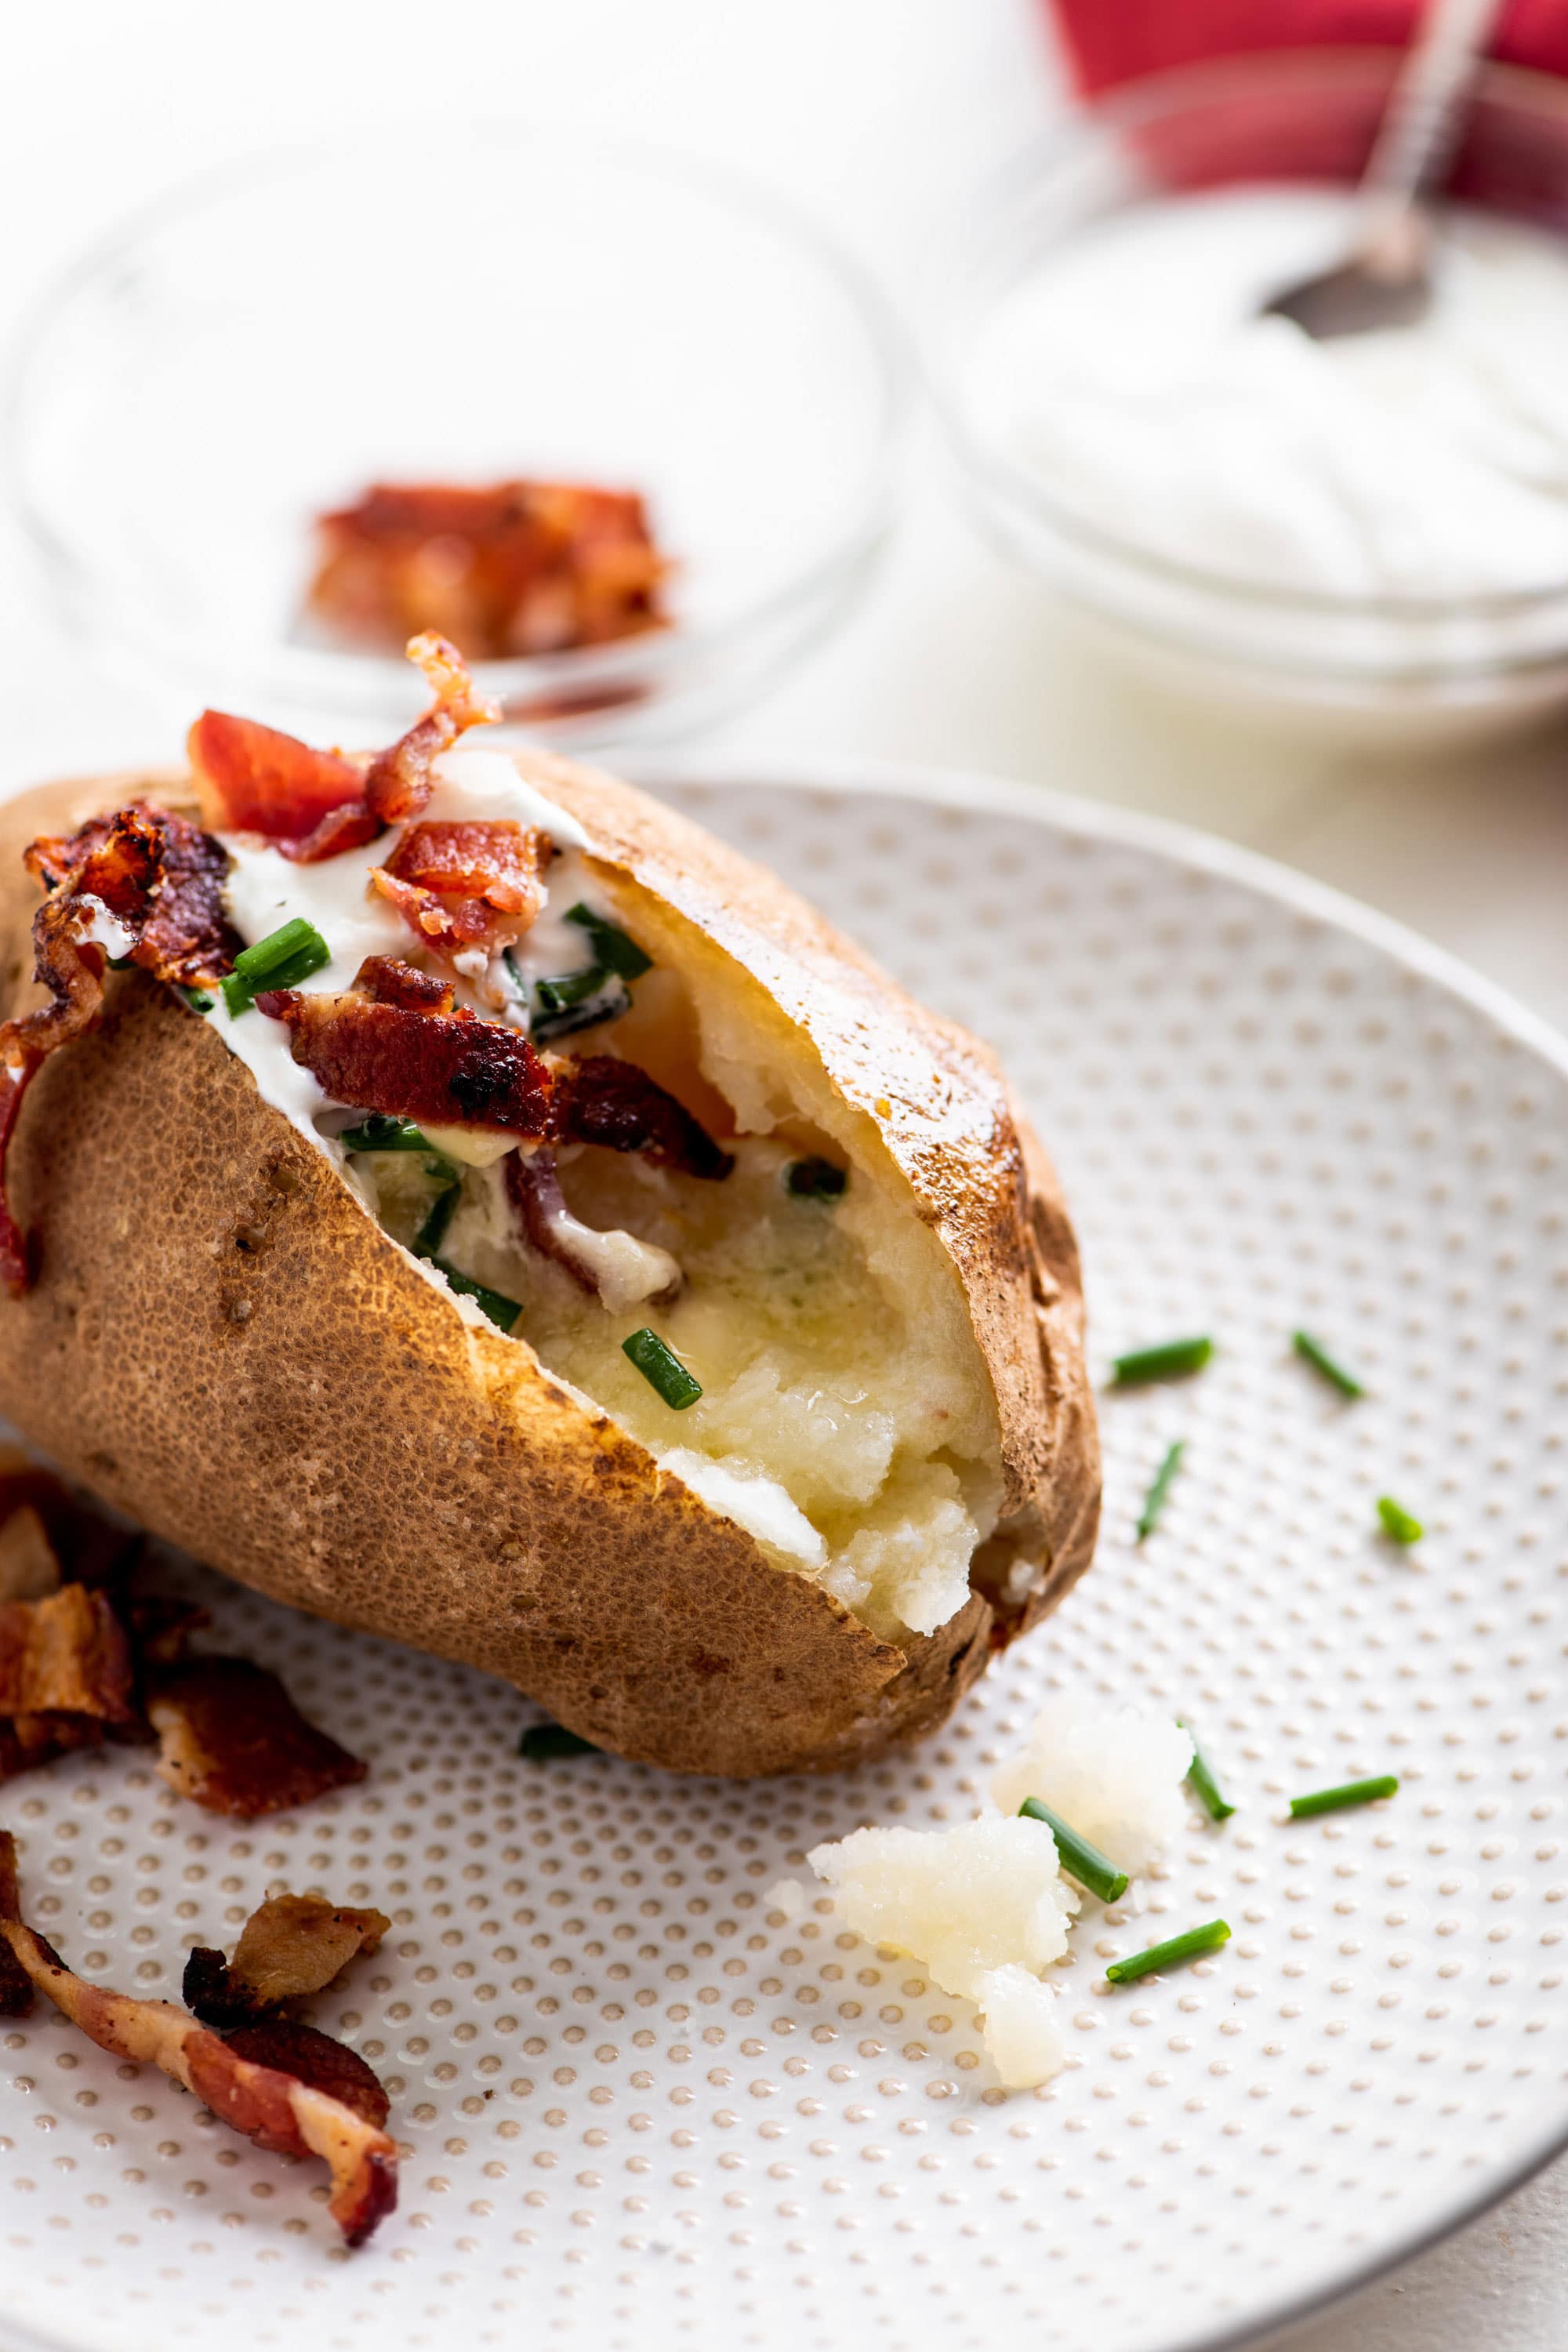 Fully loaded baked potato on a white plate.